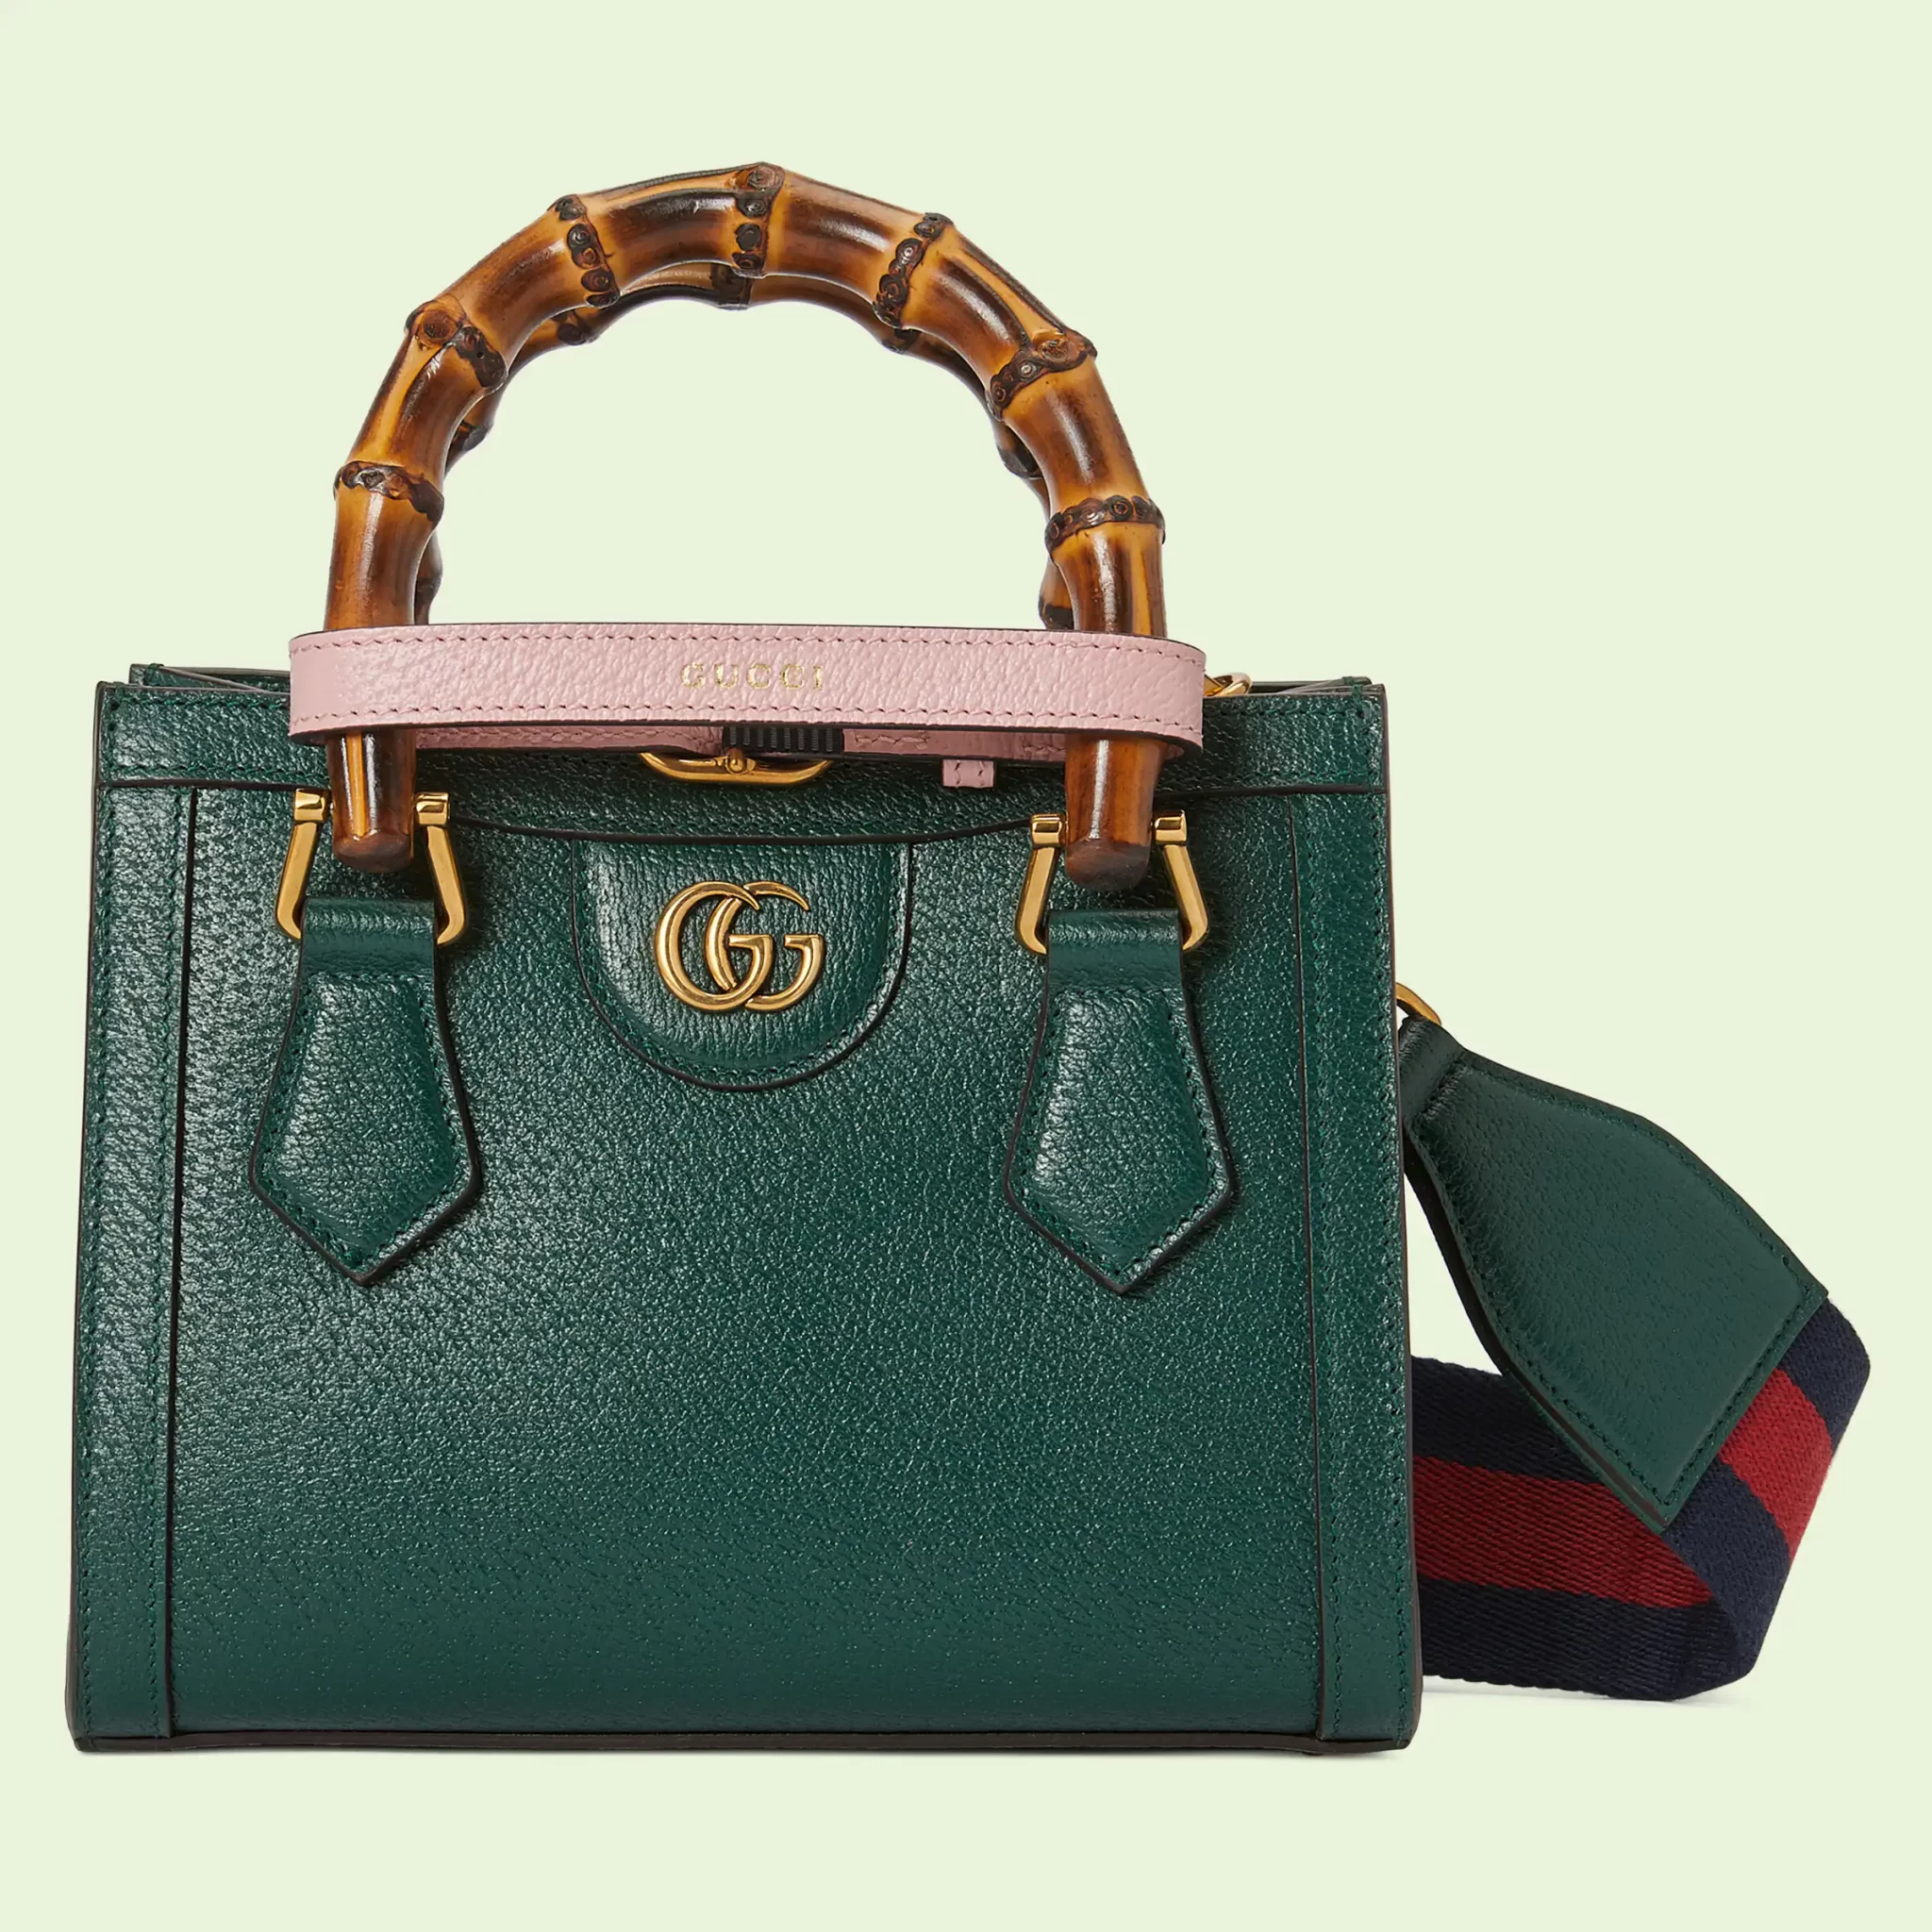 Stewart Island blozen Kers Gucci Bags Price List Reference Guide (Updated 2022) - Spotted Fashion